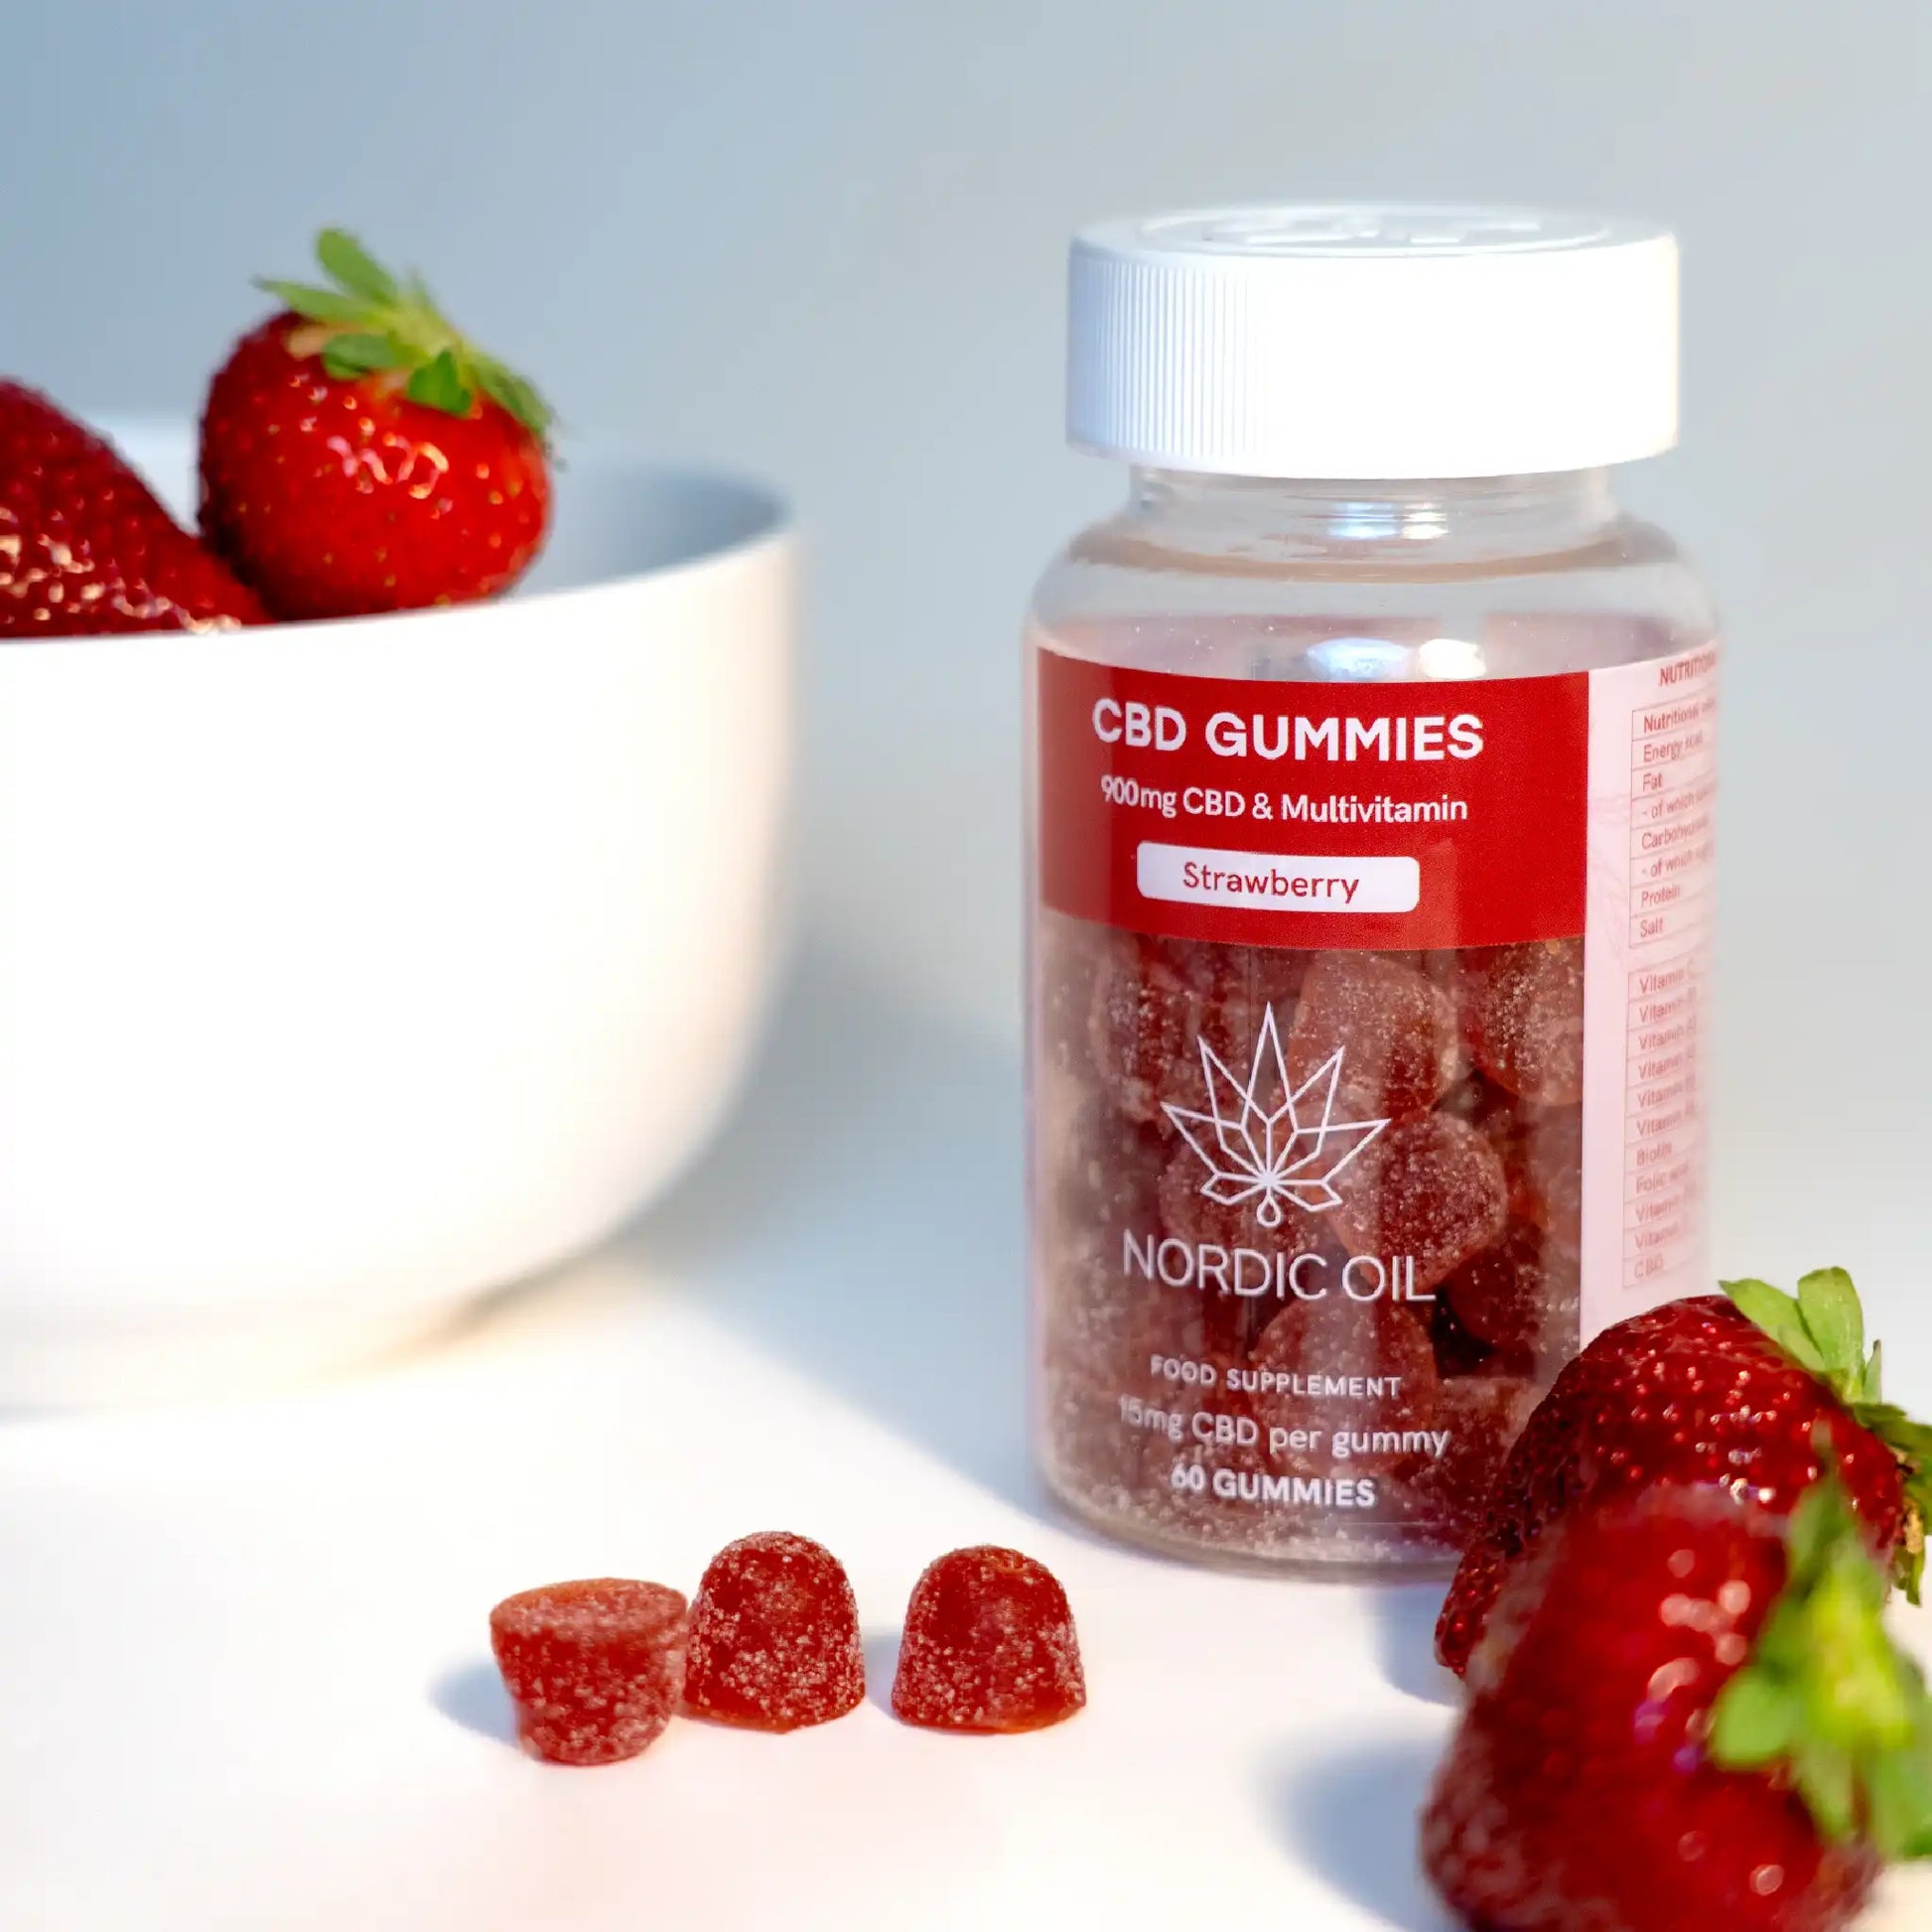 A pack of CBD Gummies with strawberries